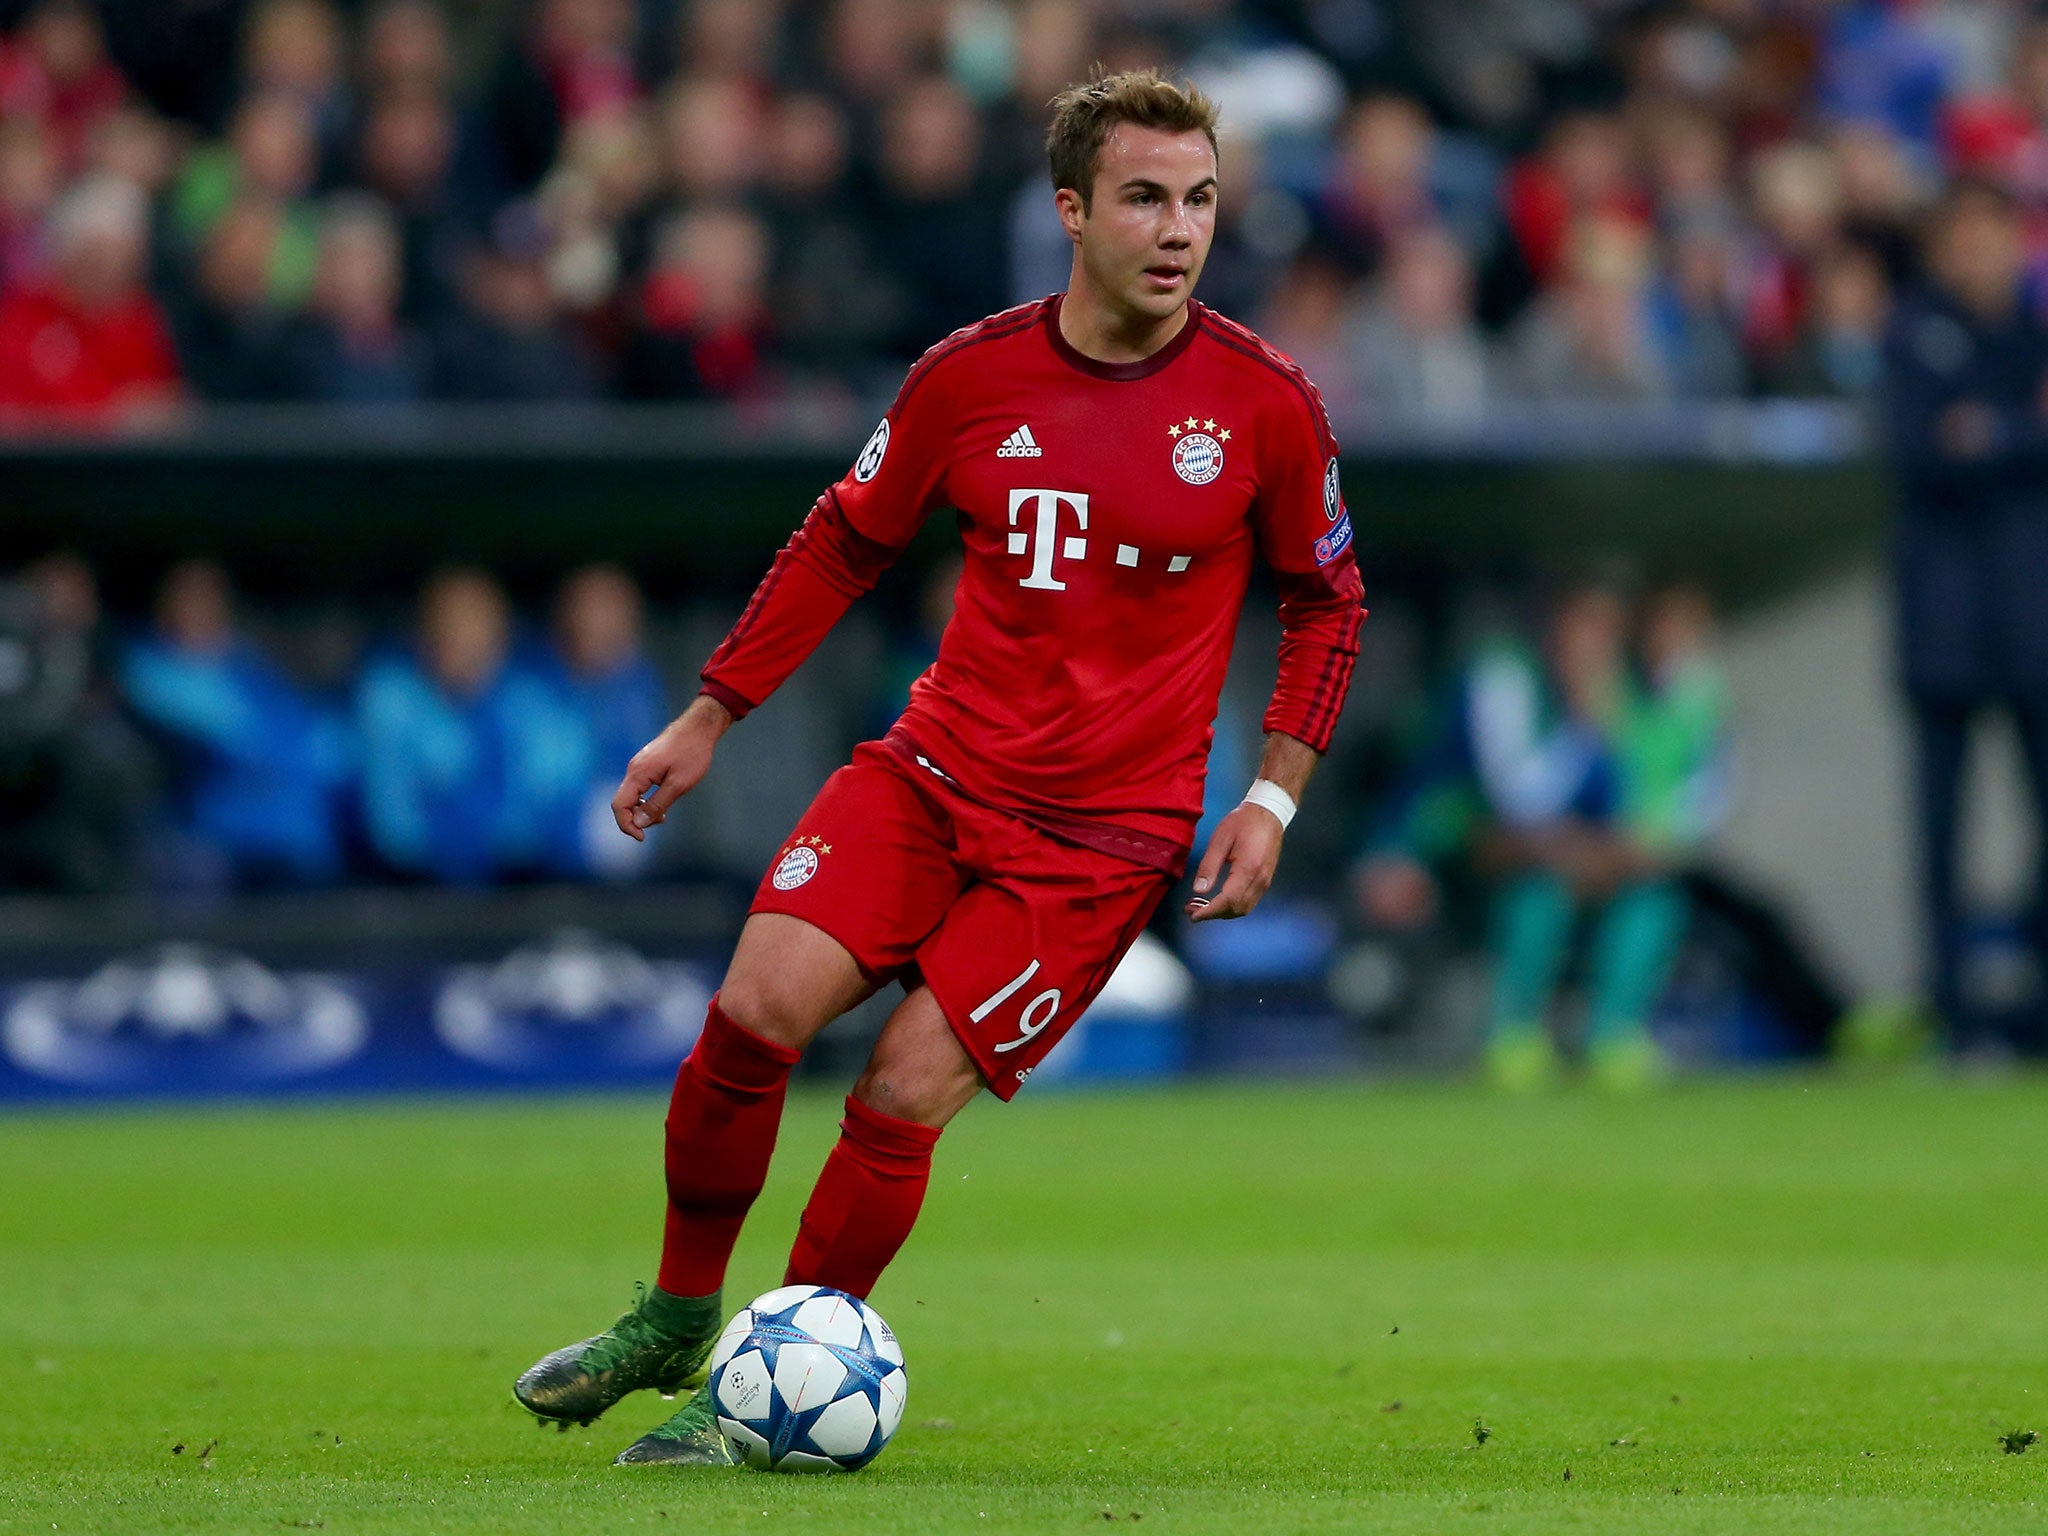 Bayern Munich attacking midfielder Mario Gotze has ruled out a move to Liverpool this month